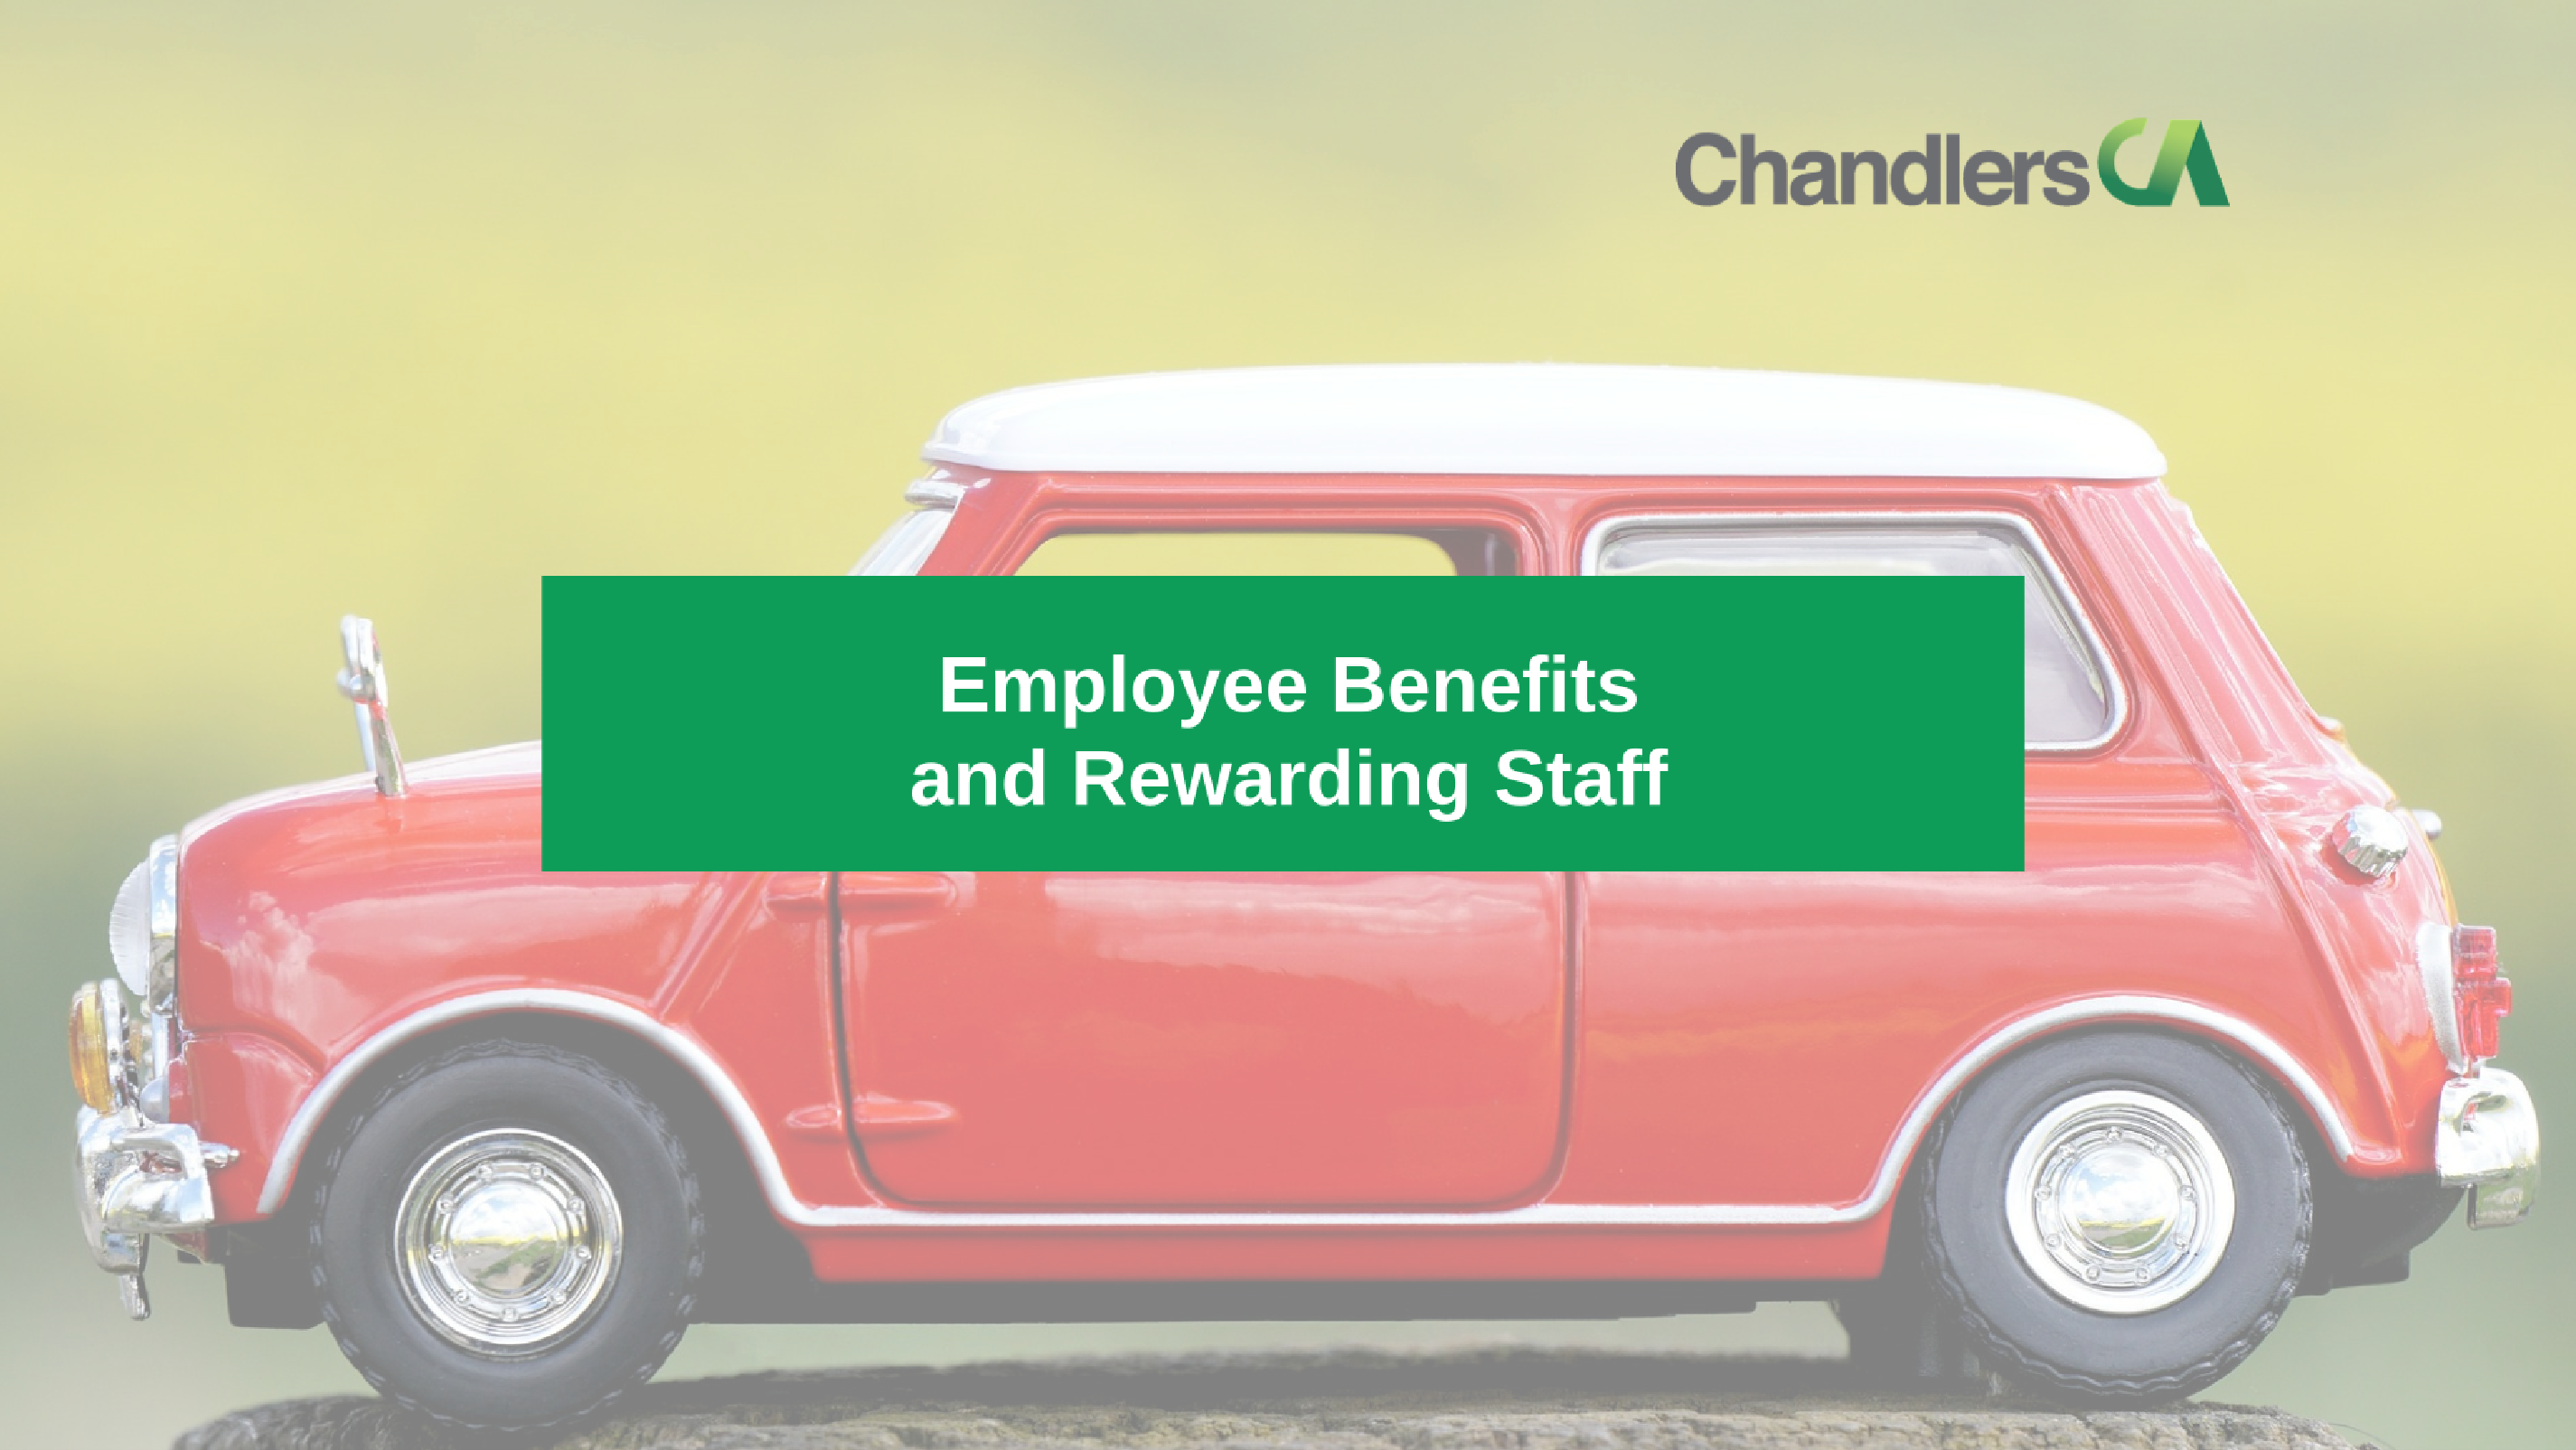 Guide to employee benefits and rewarding staff